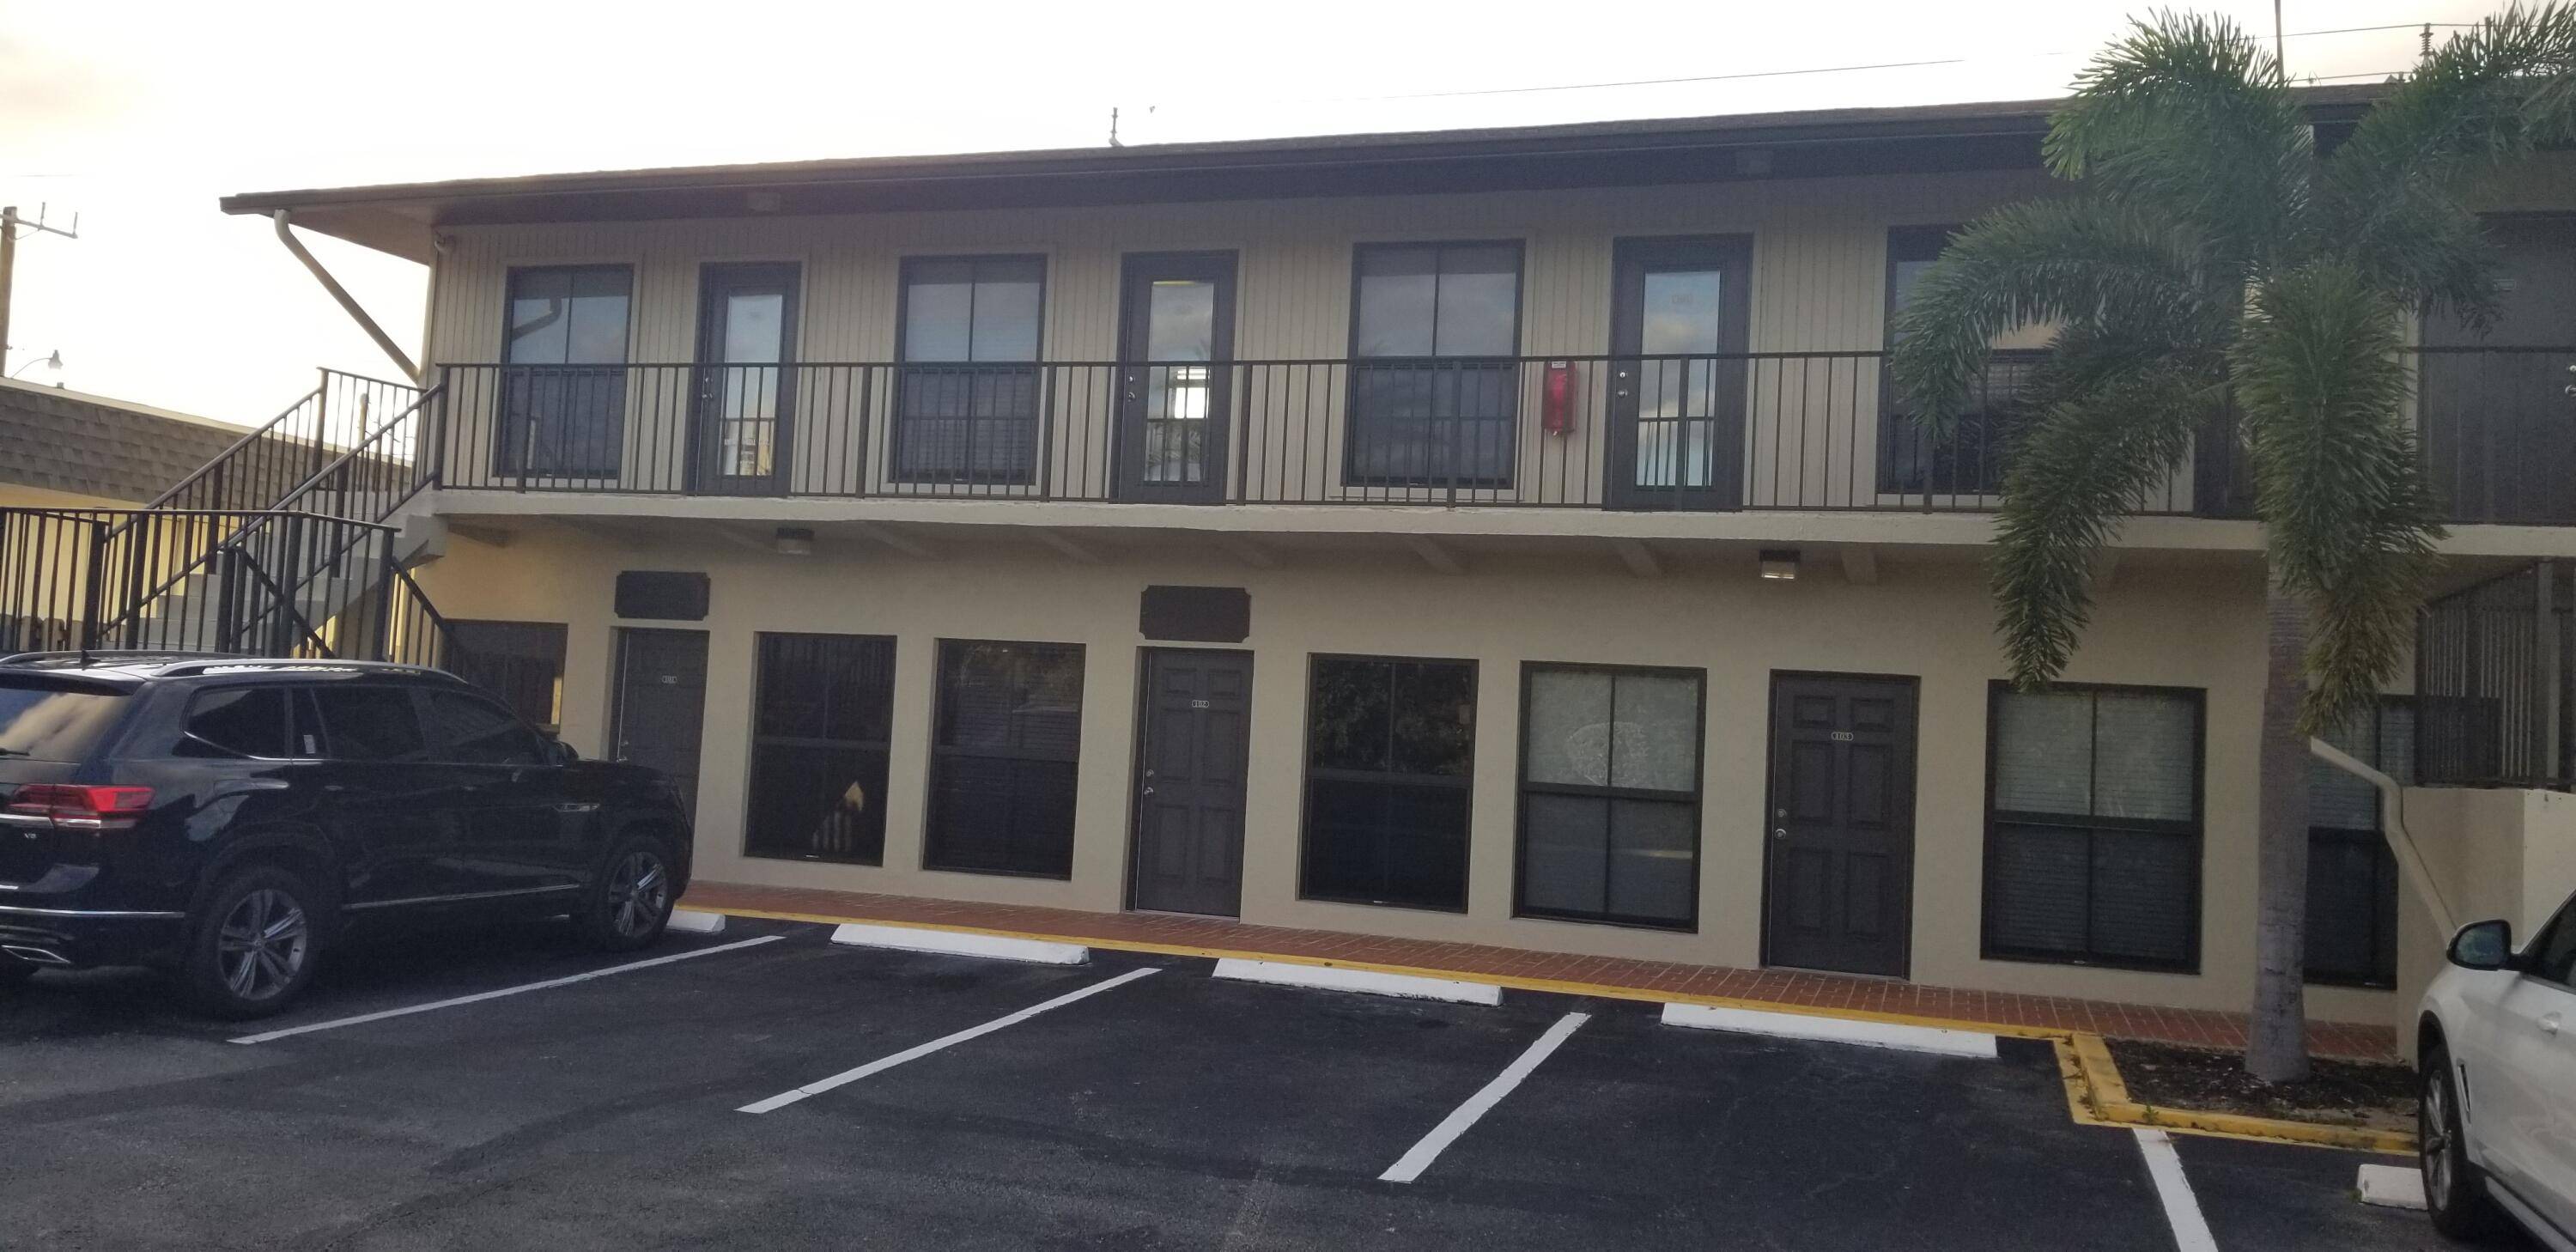 A professional office condo located in Jupiter near the intersection of Indiantown Road and Alternate A1A.